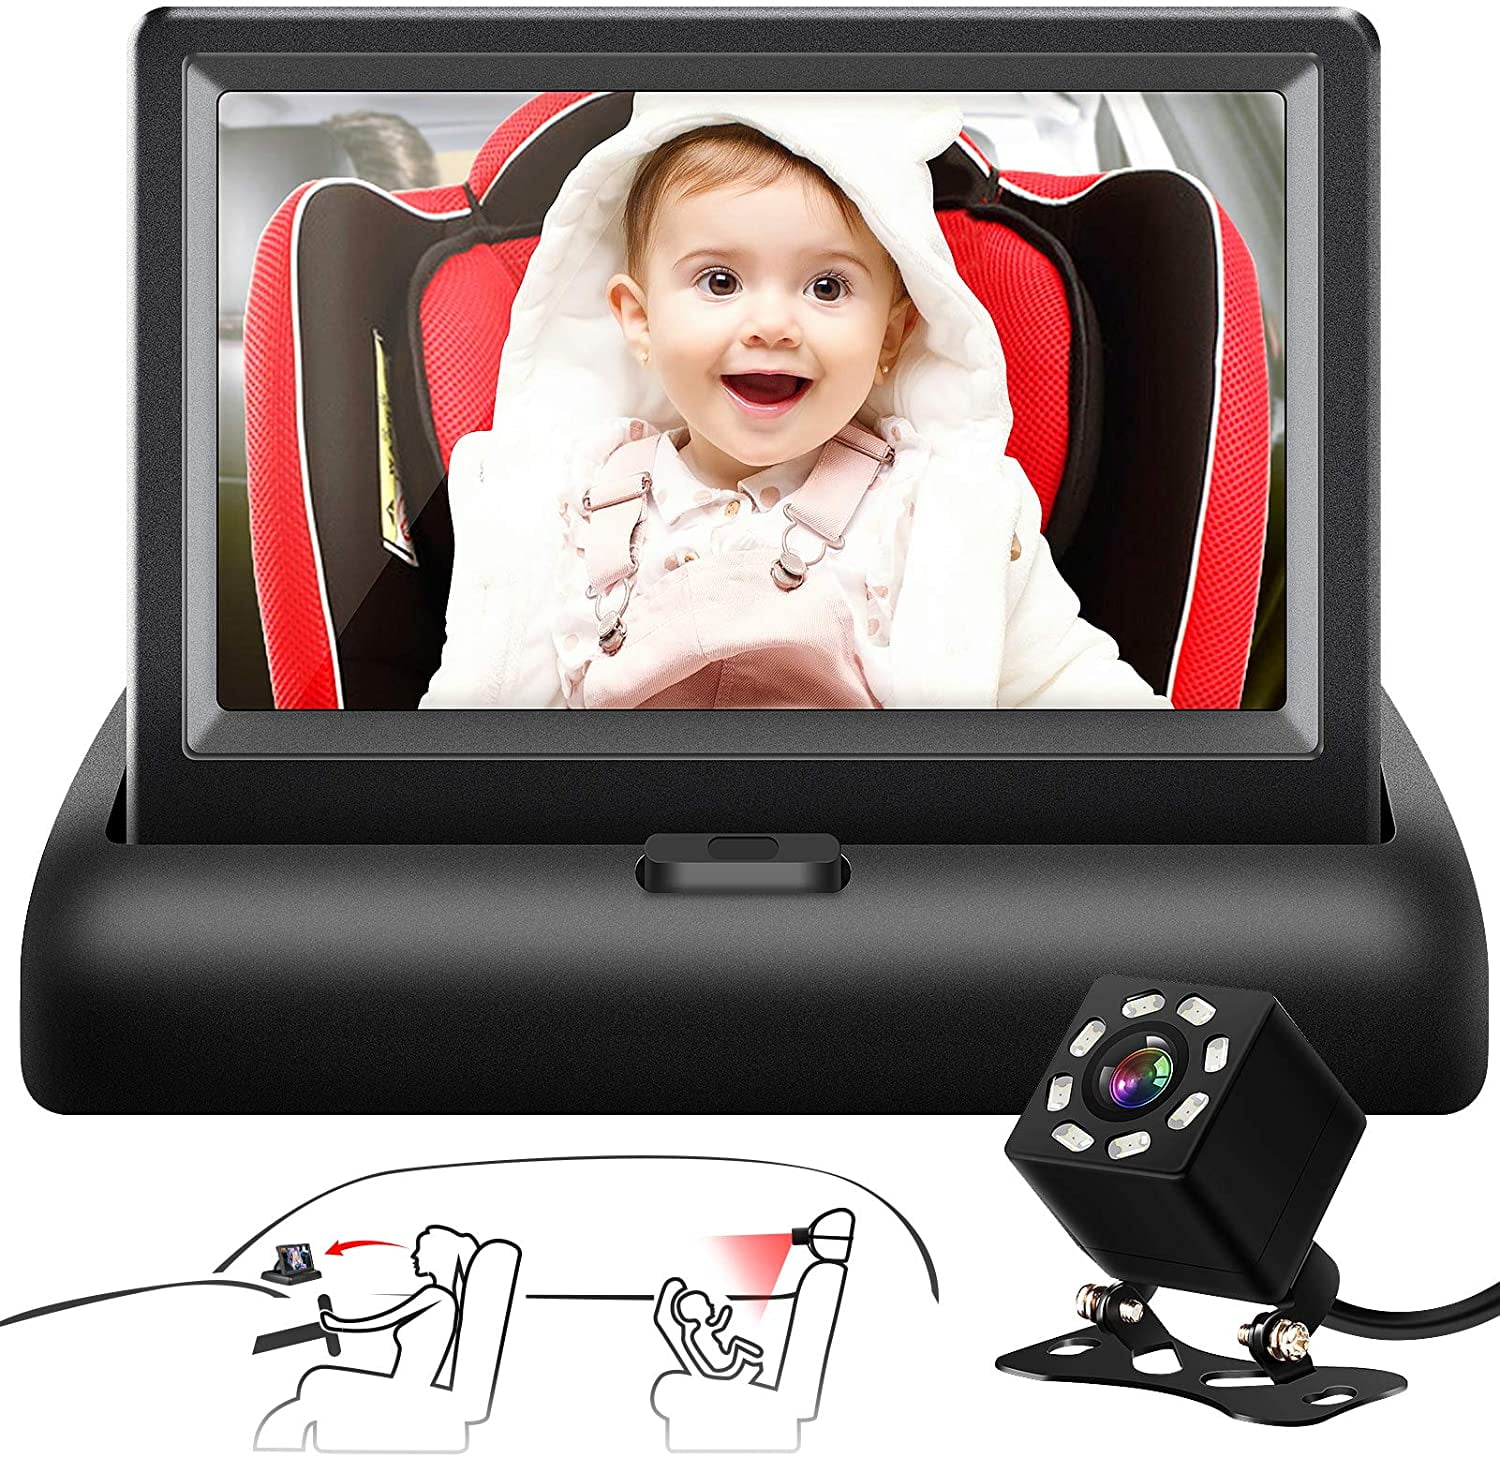 2 Site Car Baby Back Seat Rear View Mirror for Infants Child Toddler Safety VP0 